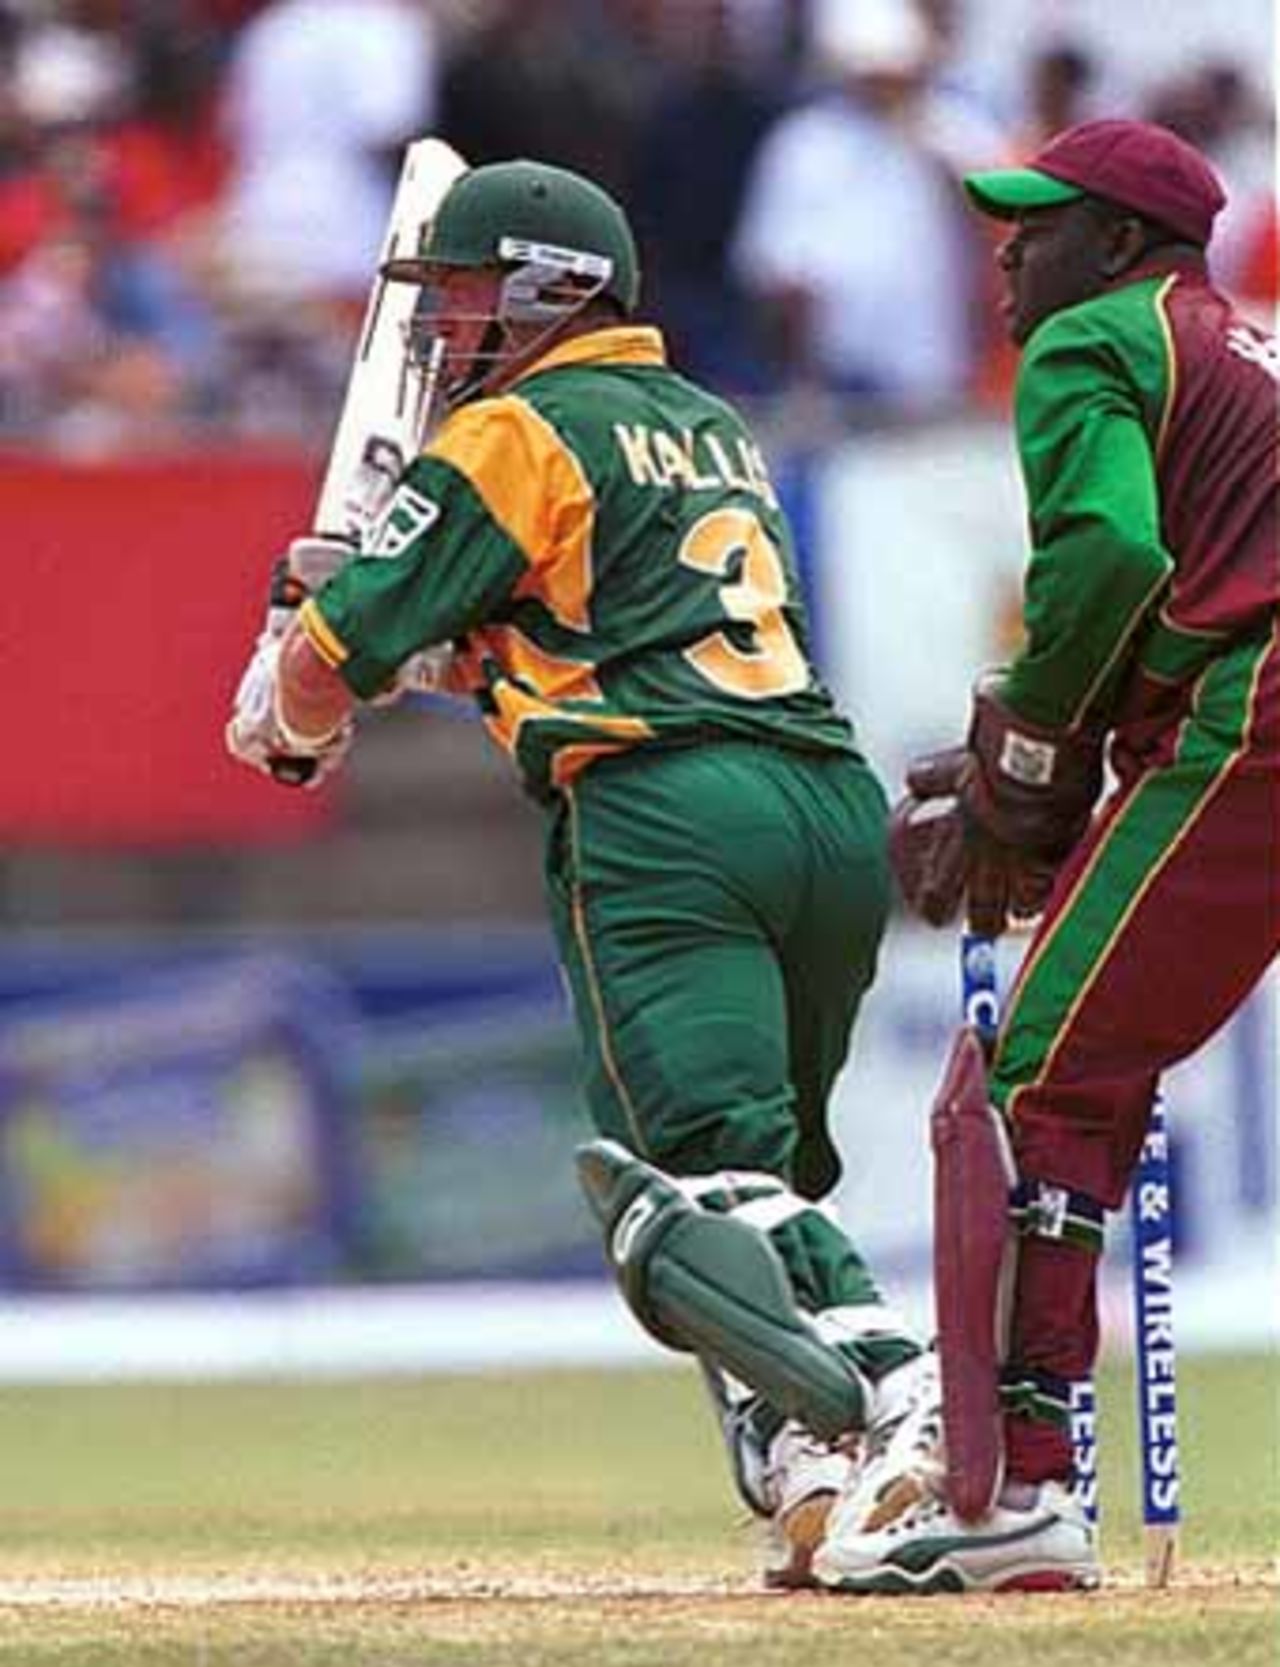 West Indies v South Africa, 2nd ODI at Antigua Recreation Ground, St John's Antigua, 2 May 2001